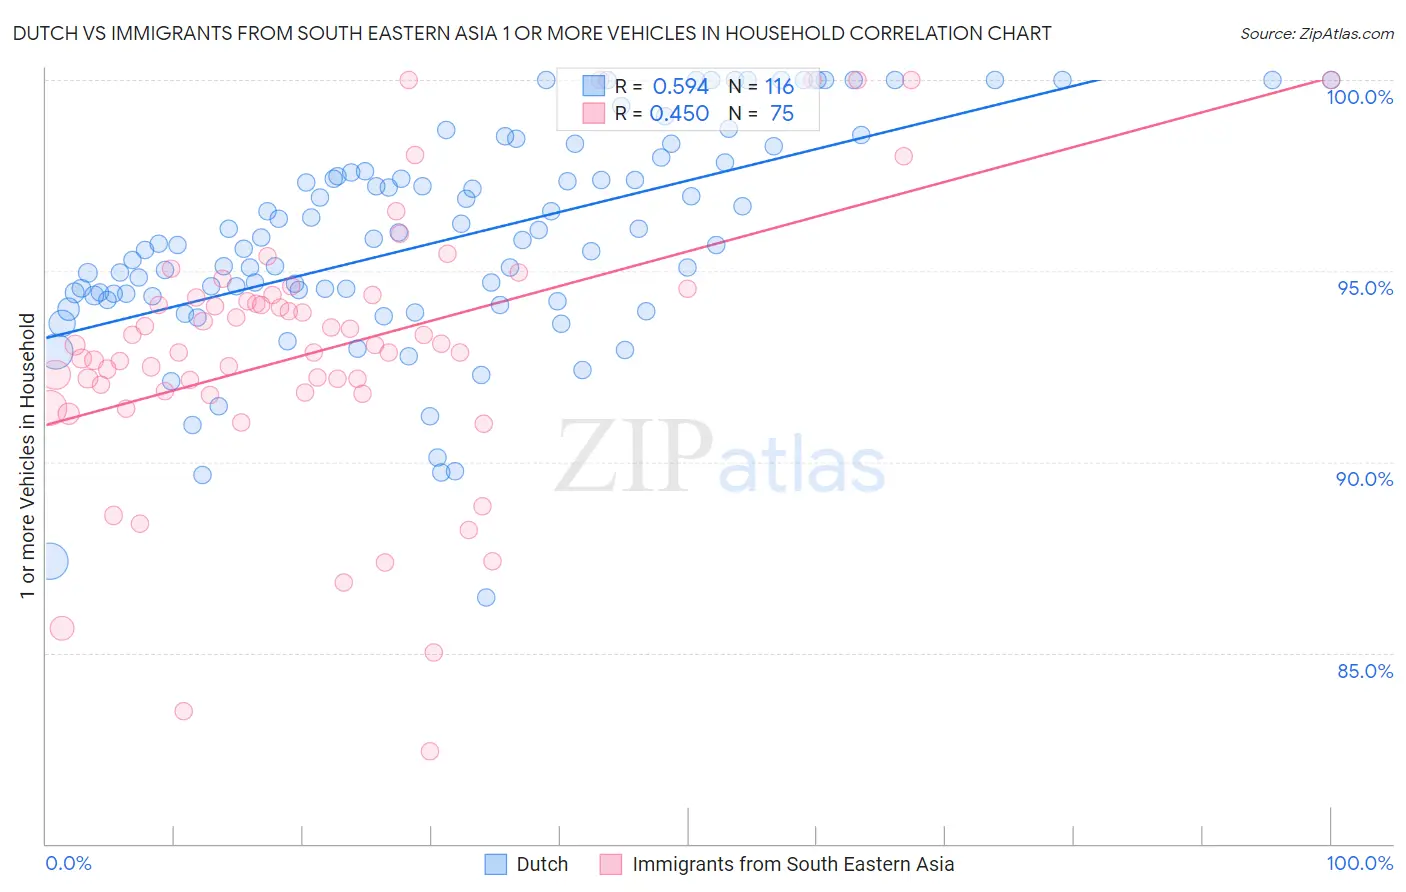 Dutch vs Immigrants from South Eastern Asia 1 or more Vehicles in Household